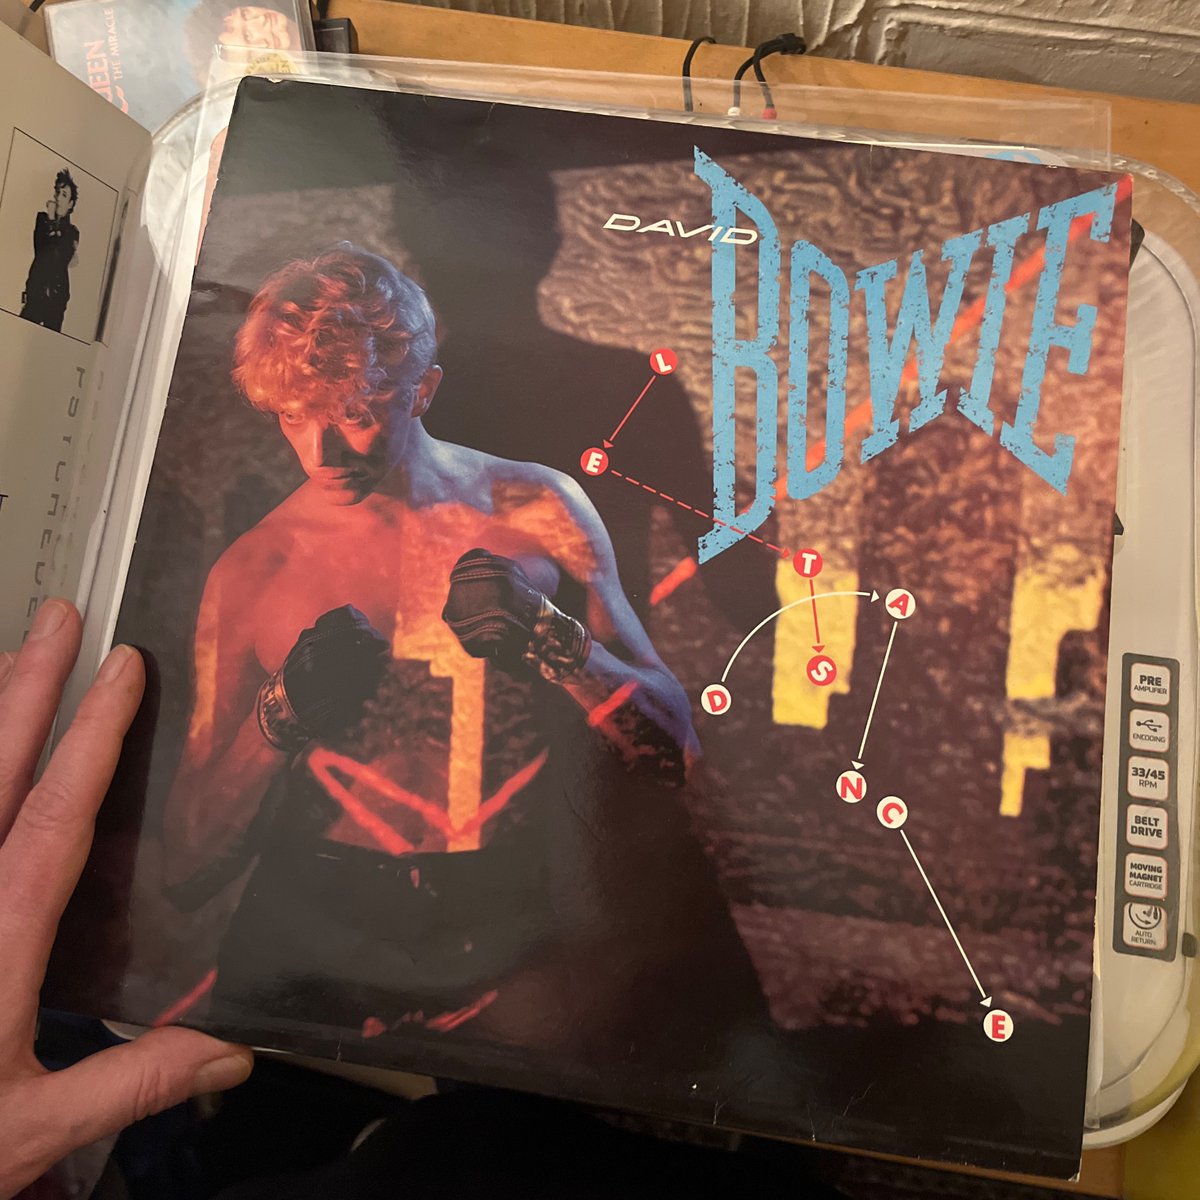 David Bowie - Let’s Dance ✌🏻🩷💕
#NowPlaying #80smusic #popmusic #rockmusic #vinylrecords #vinylcollection #albumsyoumusthear